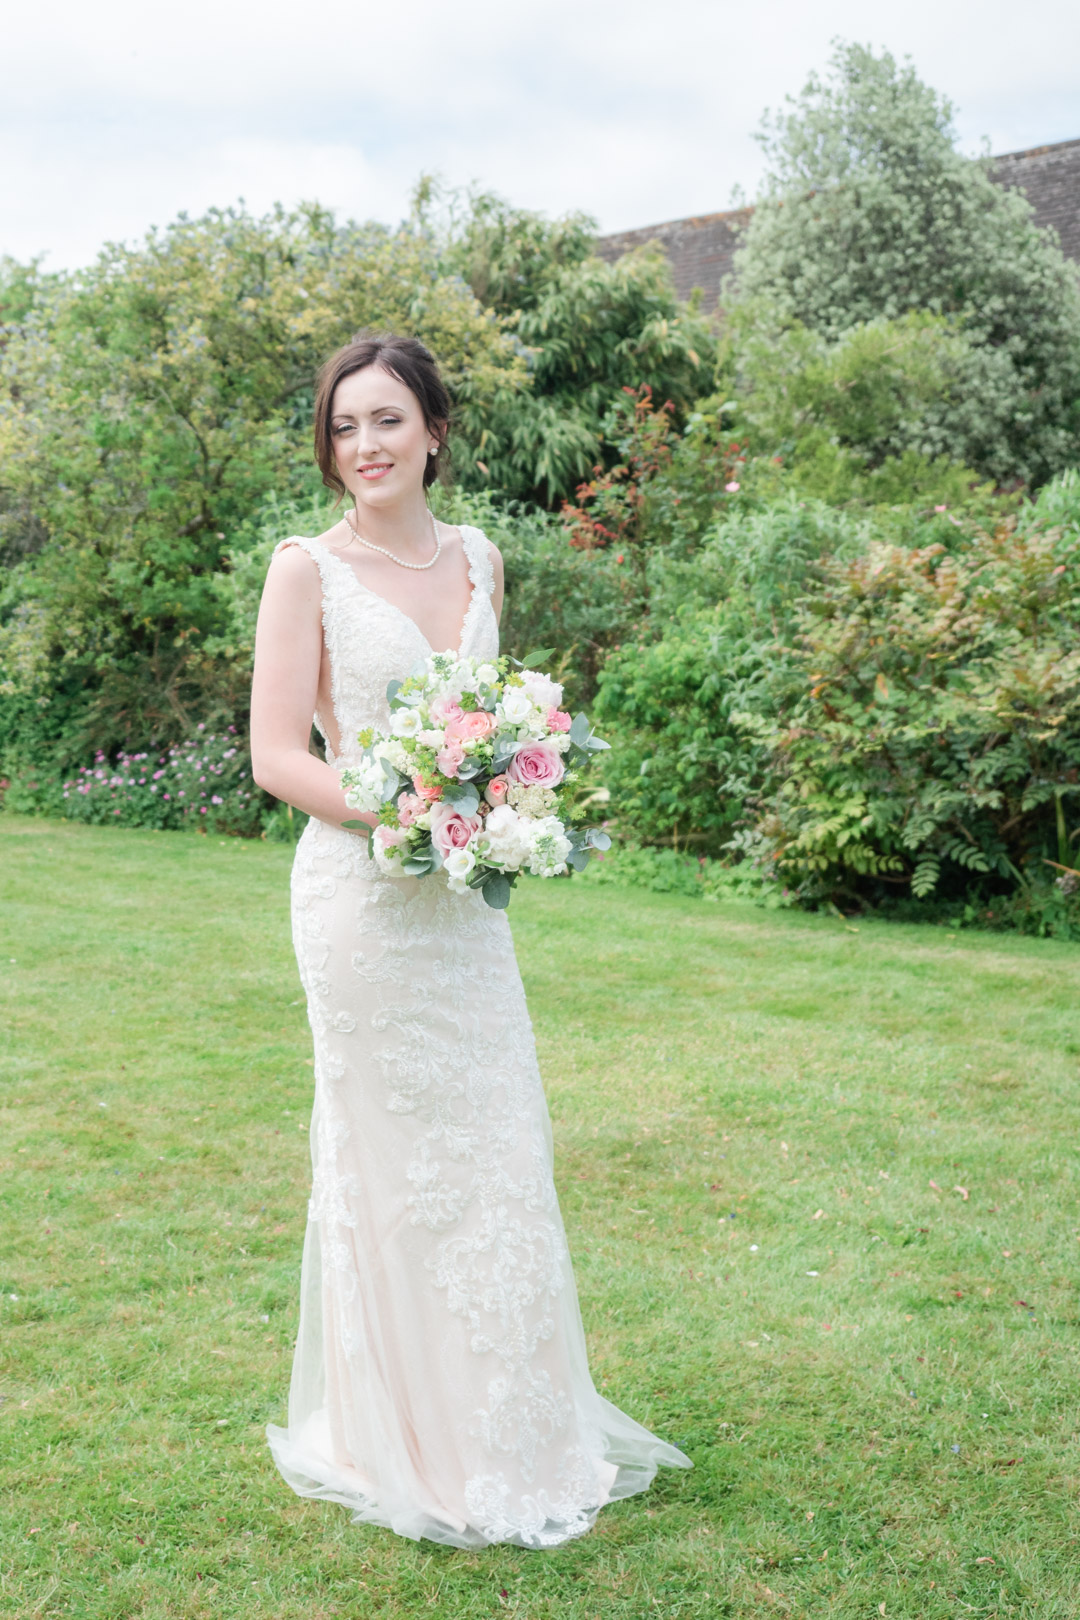 Bride holding bouquet on a lawn